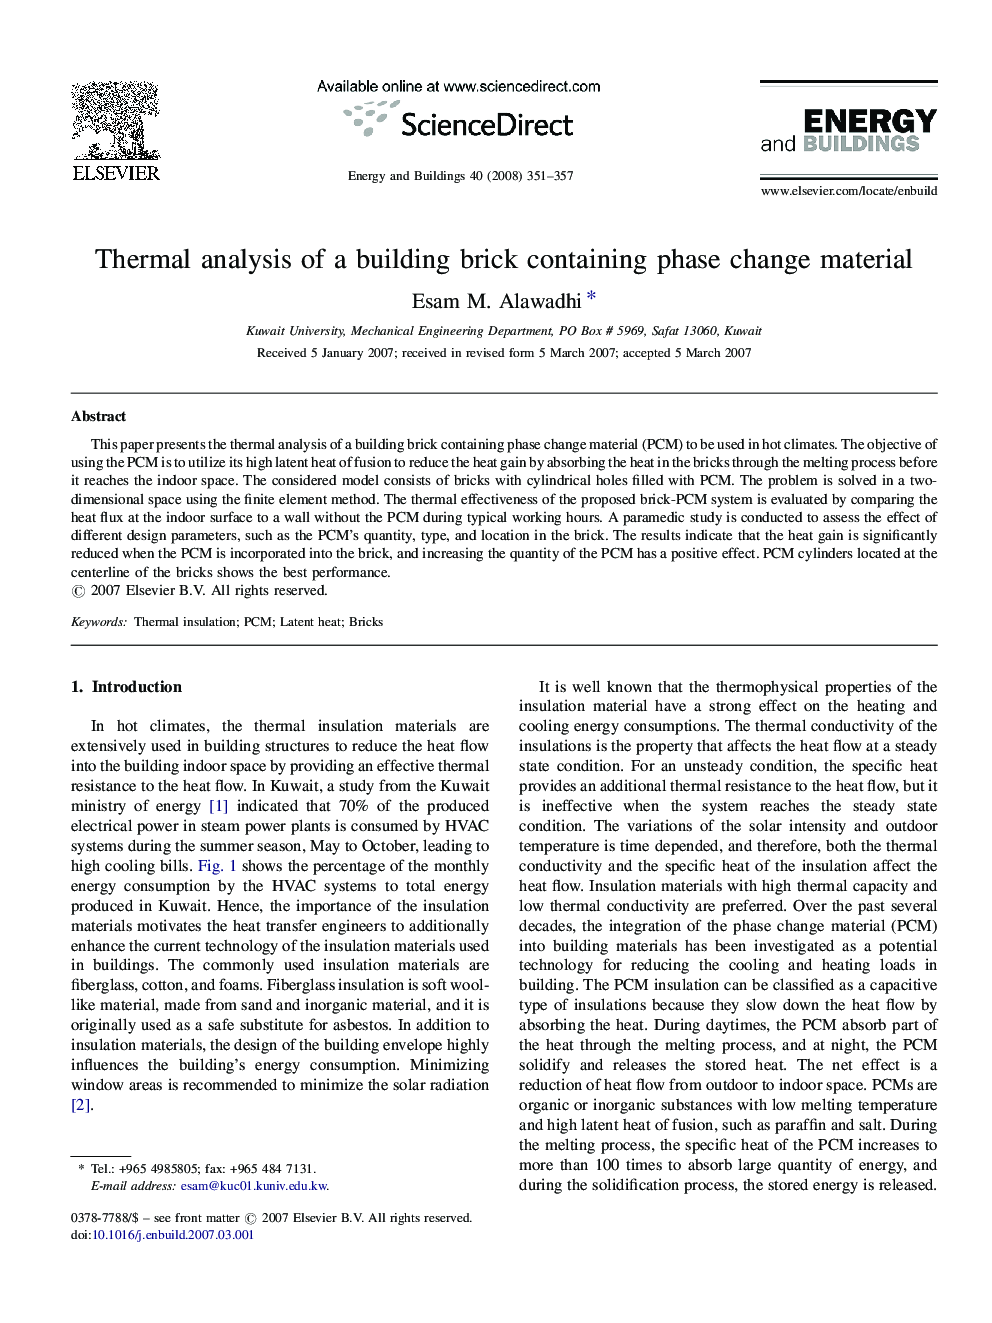 Thermal analysis of a building brick containing phase change material